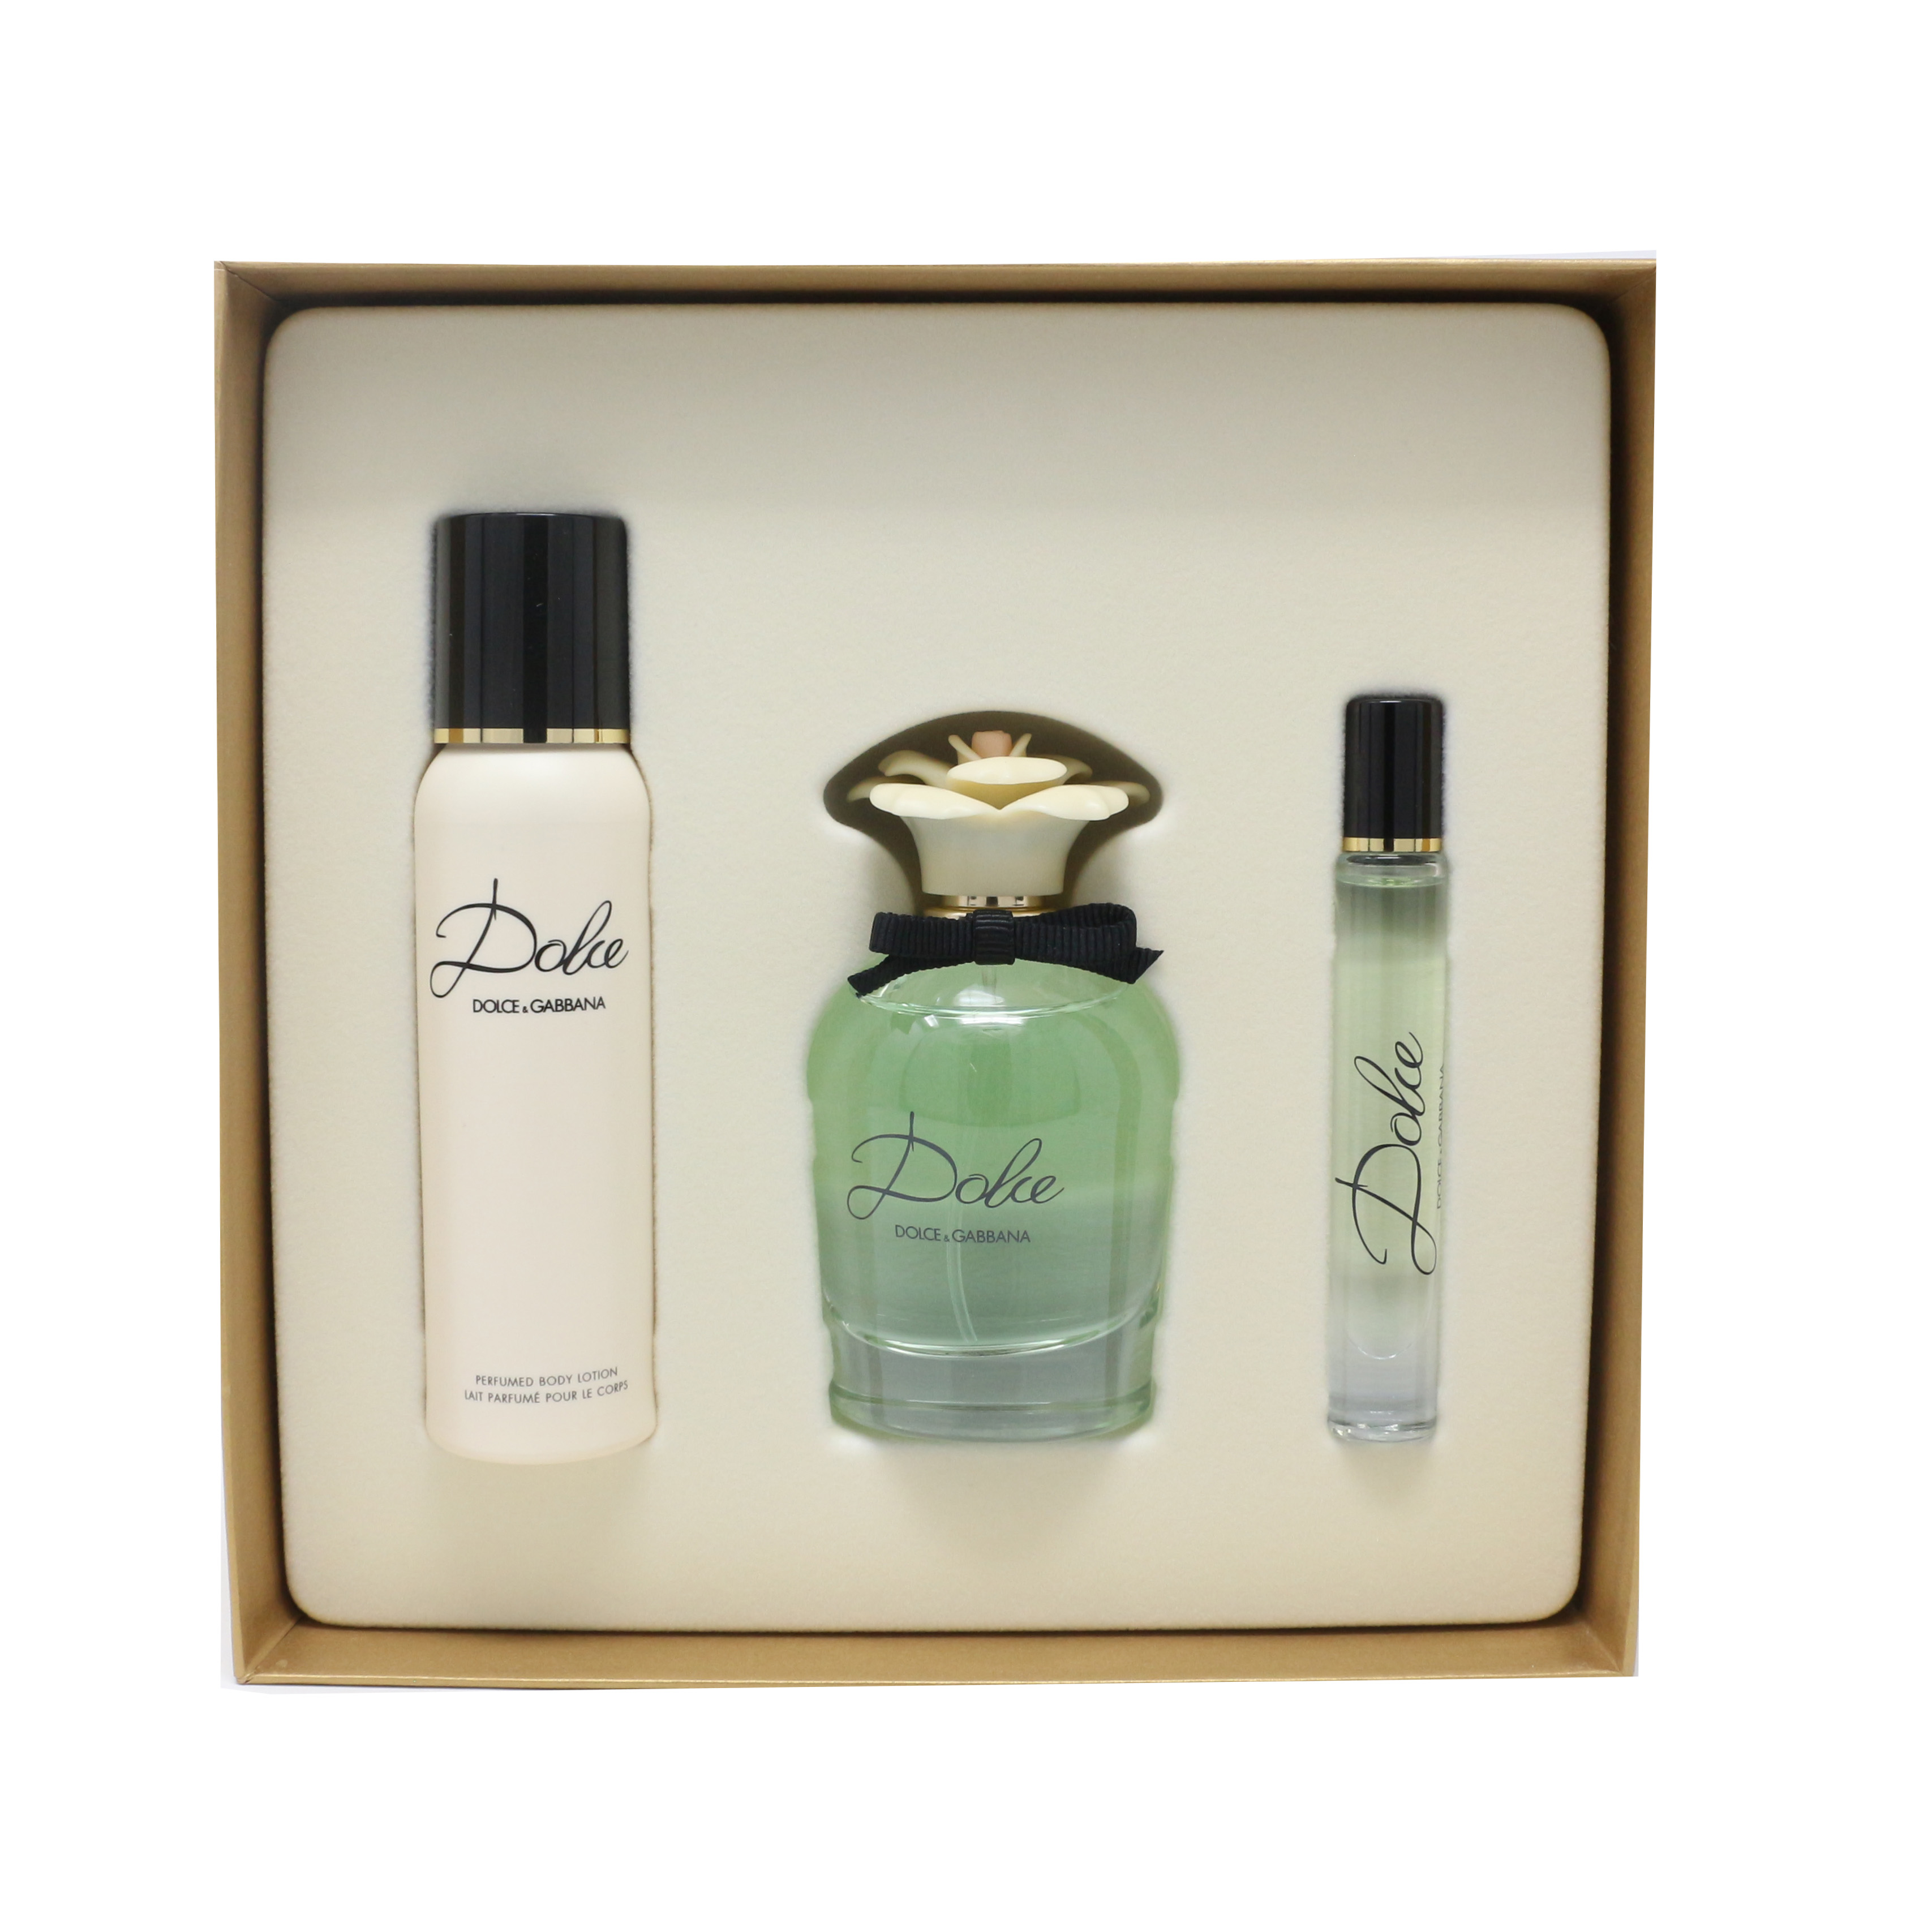 dolce by dolce and gabbana gift set